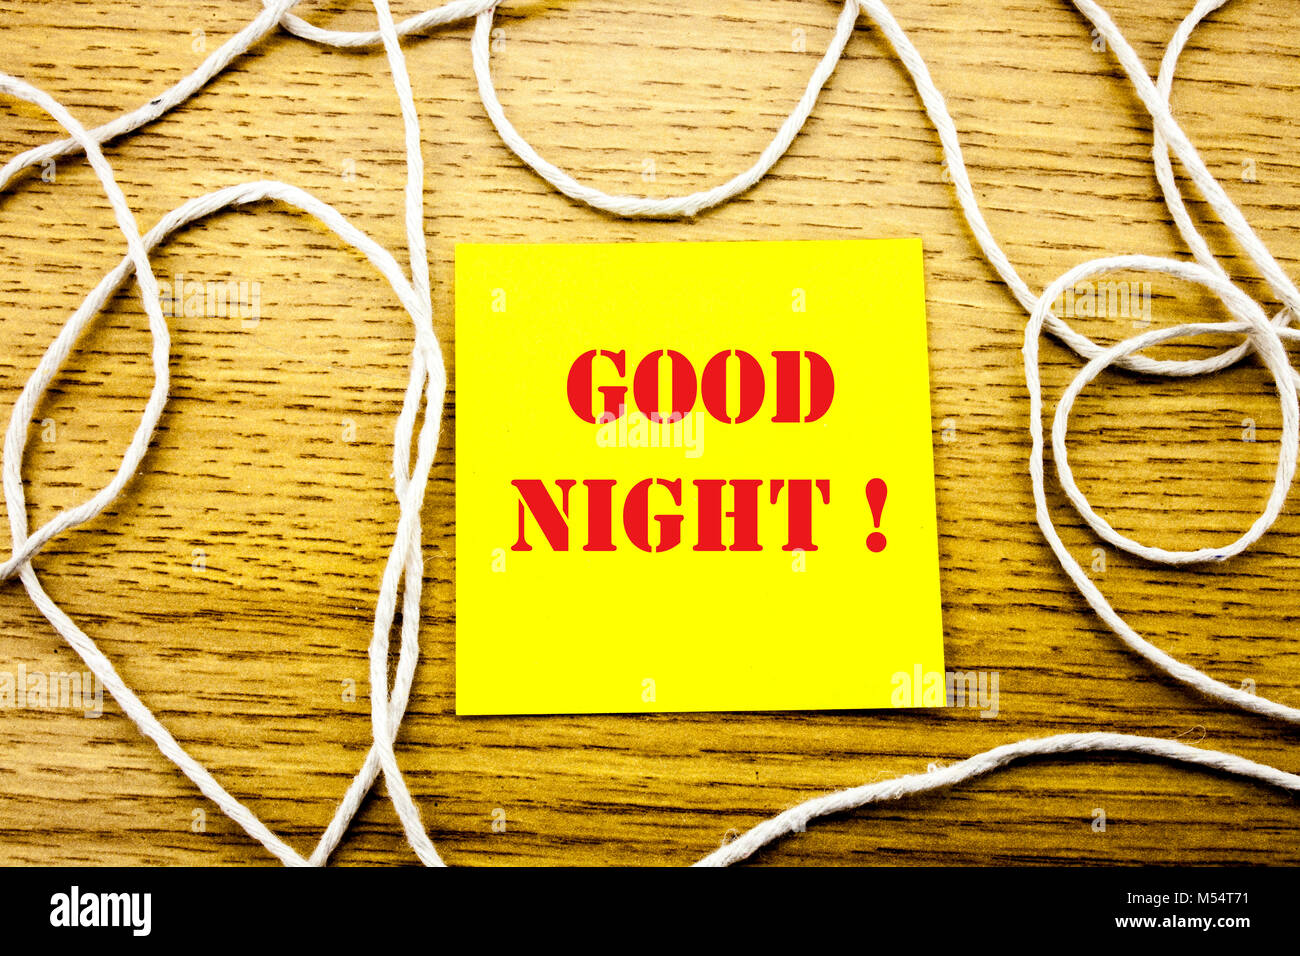 Good Night. word on yellow sticky note in wooden background ...